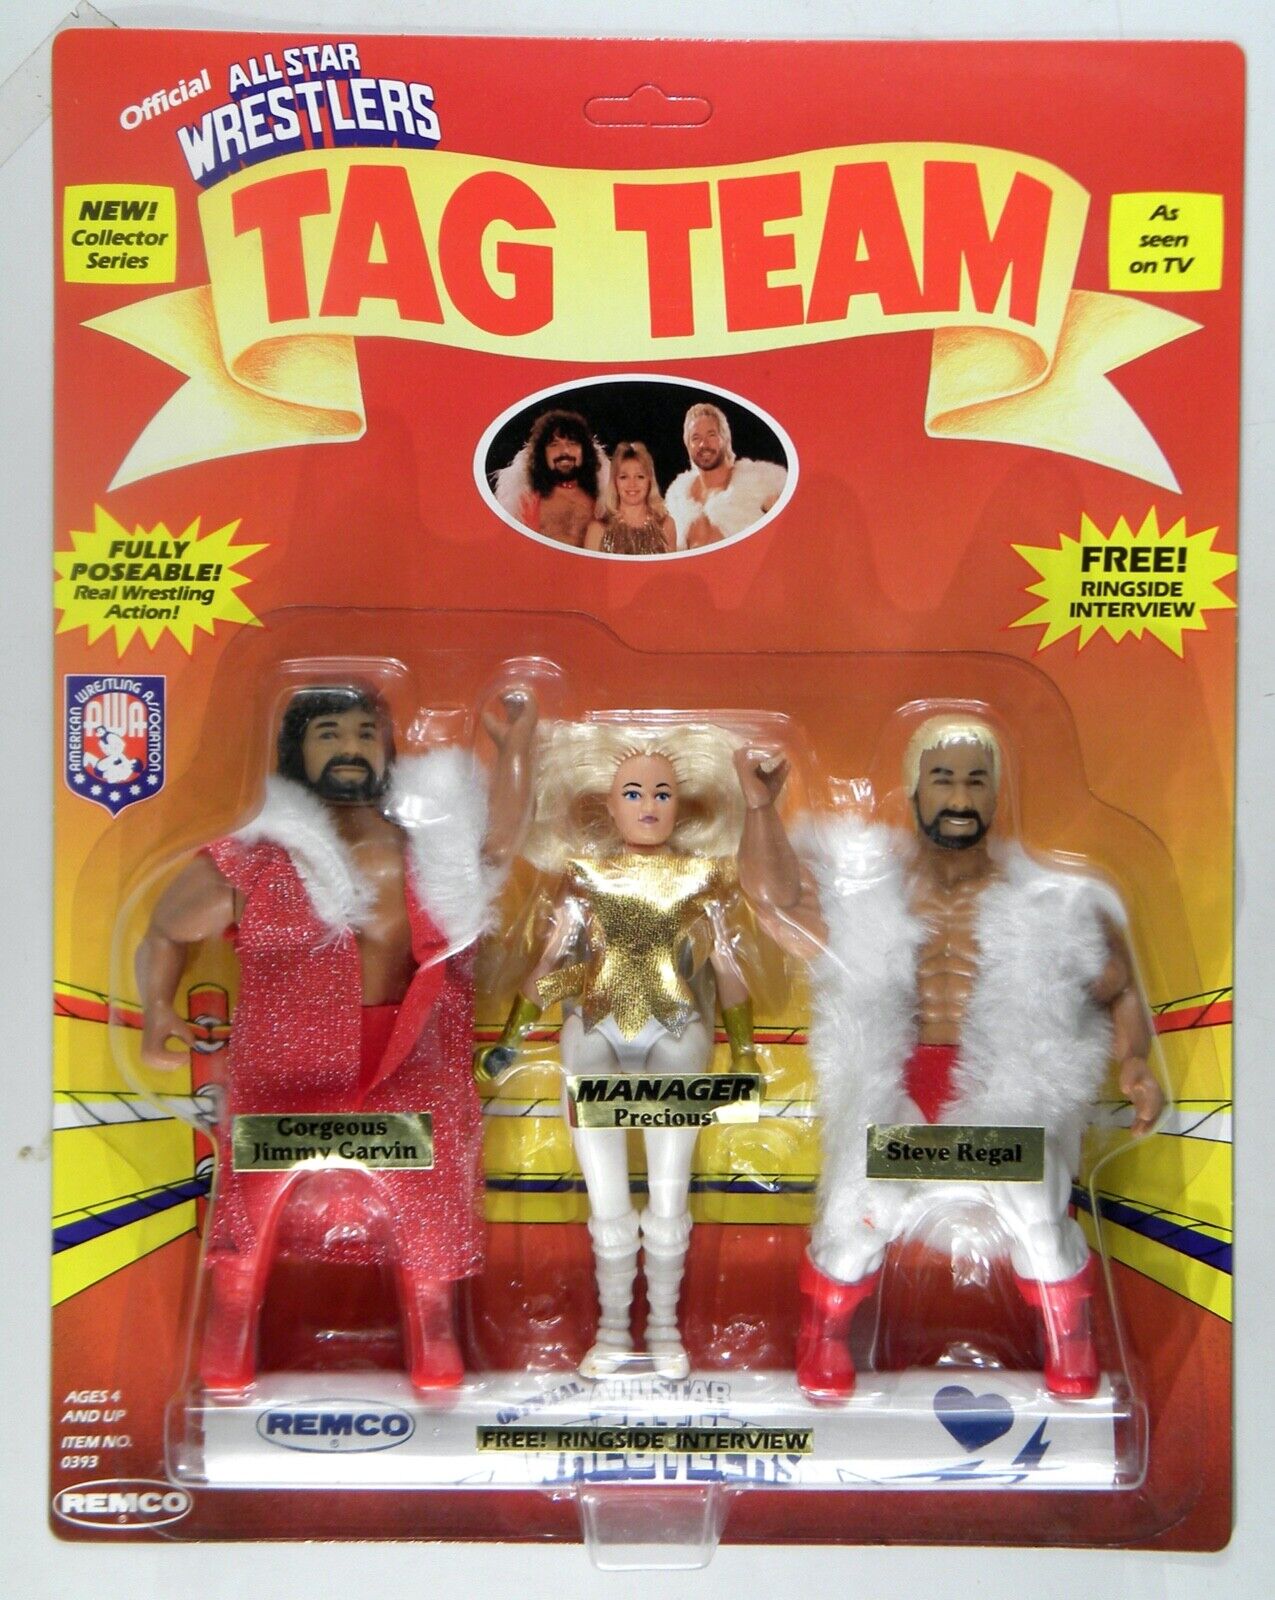 1985 AWA Remco All Star Wrestlers Series 3 Gorgeous Jimmy Garvin [With Flabby Body], Precious & Steve Regal